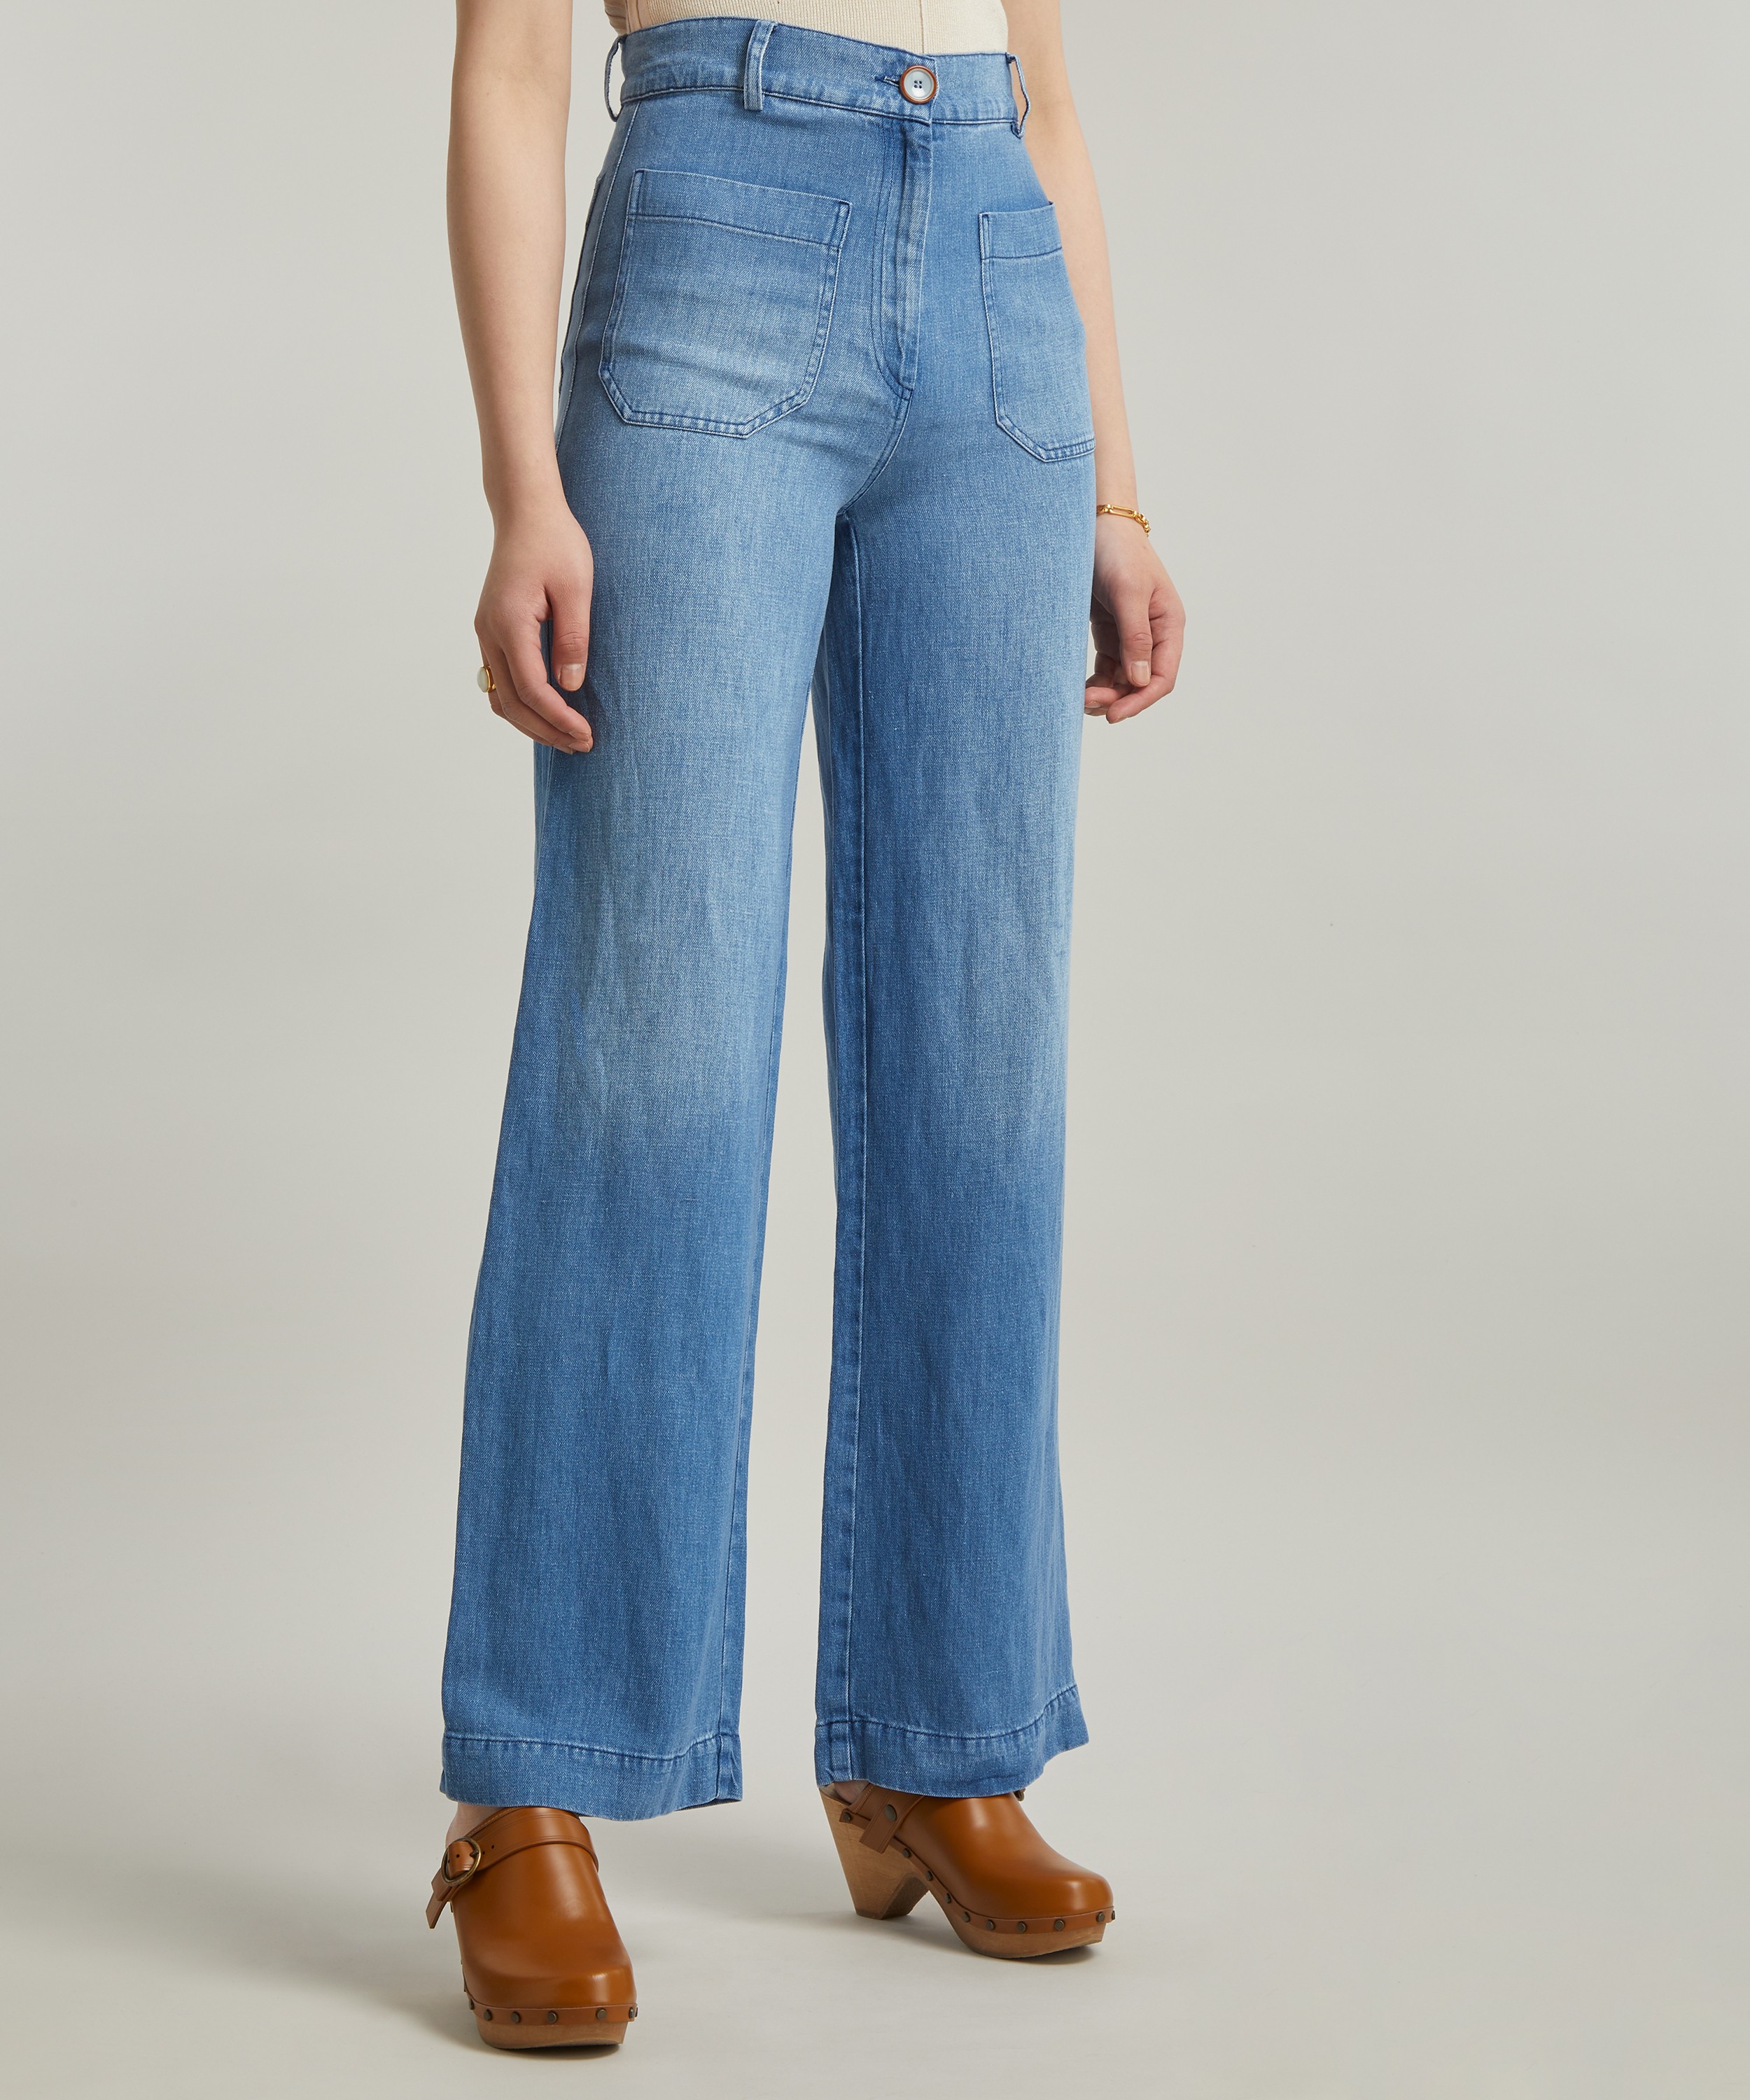 JOHNNY SPRING Denim Washed, Trousers